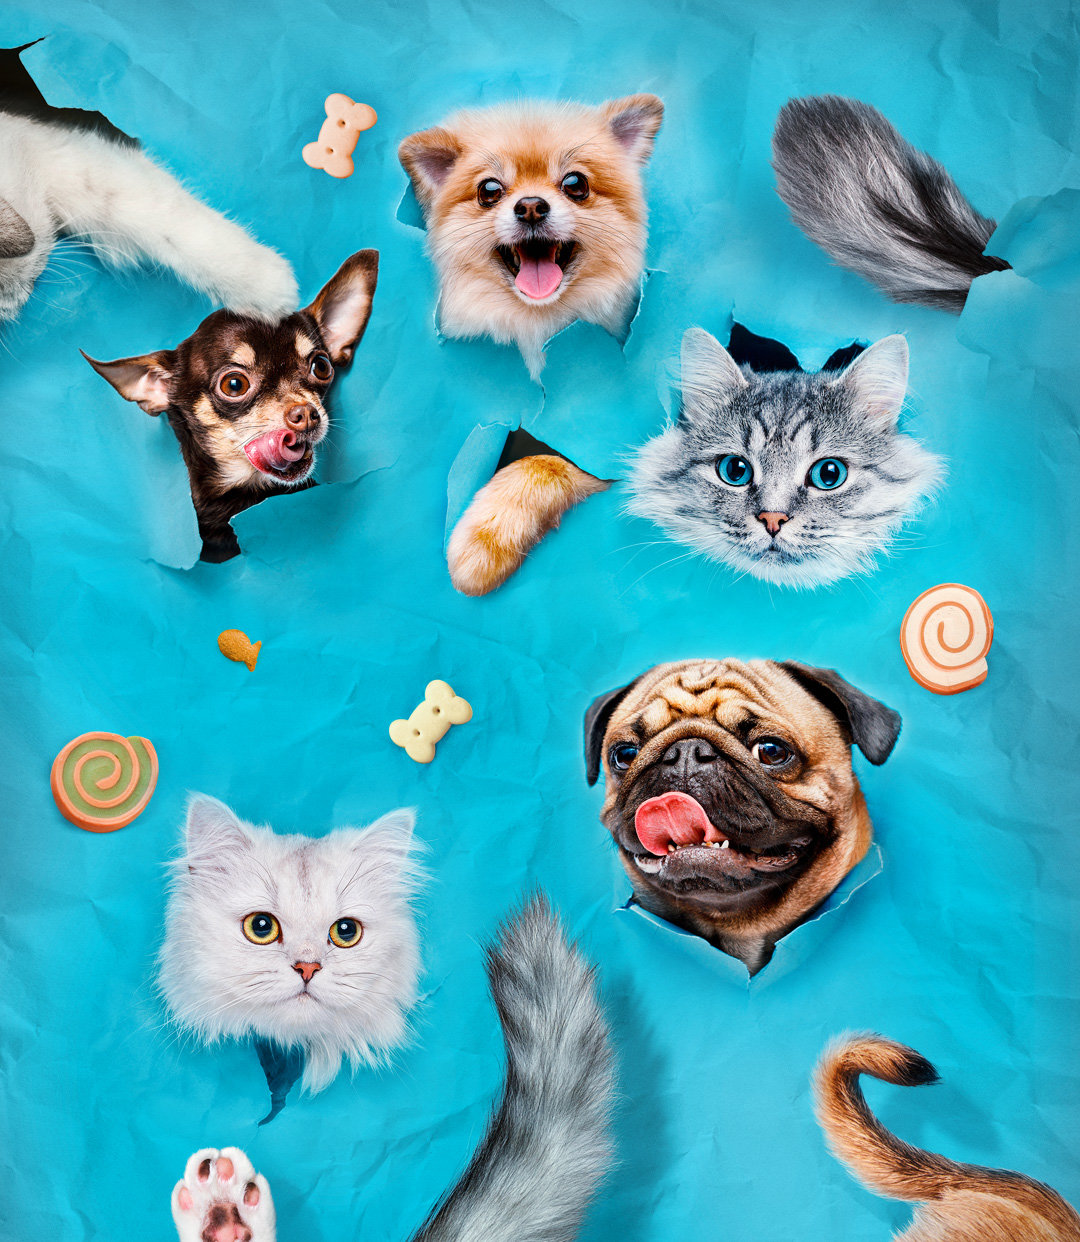 Funny Animals 2023 - Cute Dogs and Cats Doing Hilarious Things